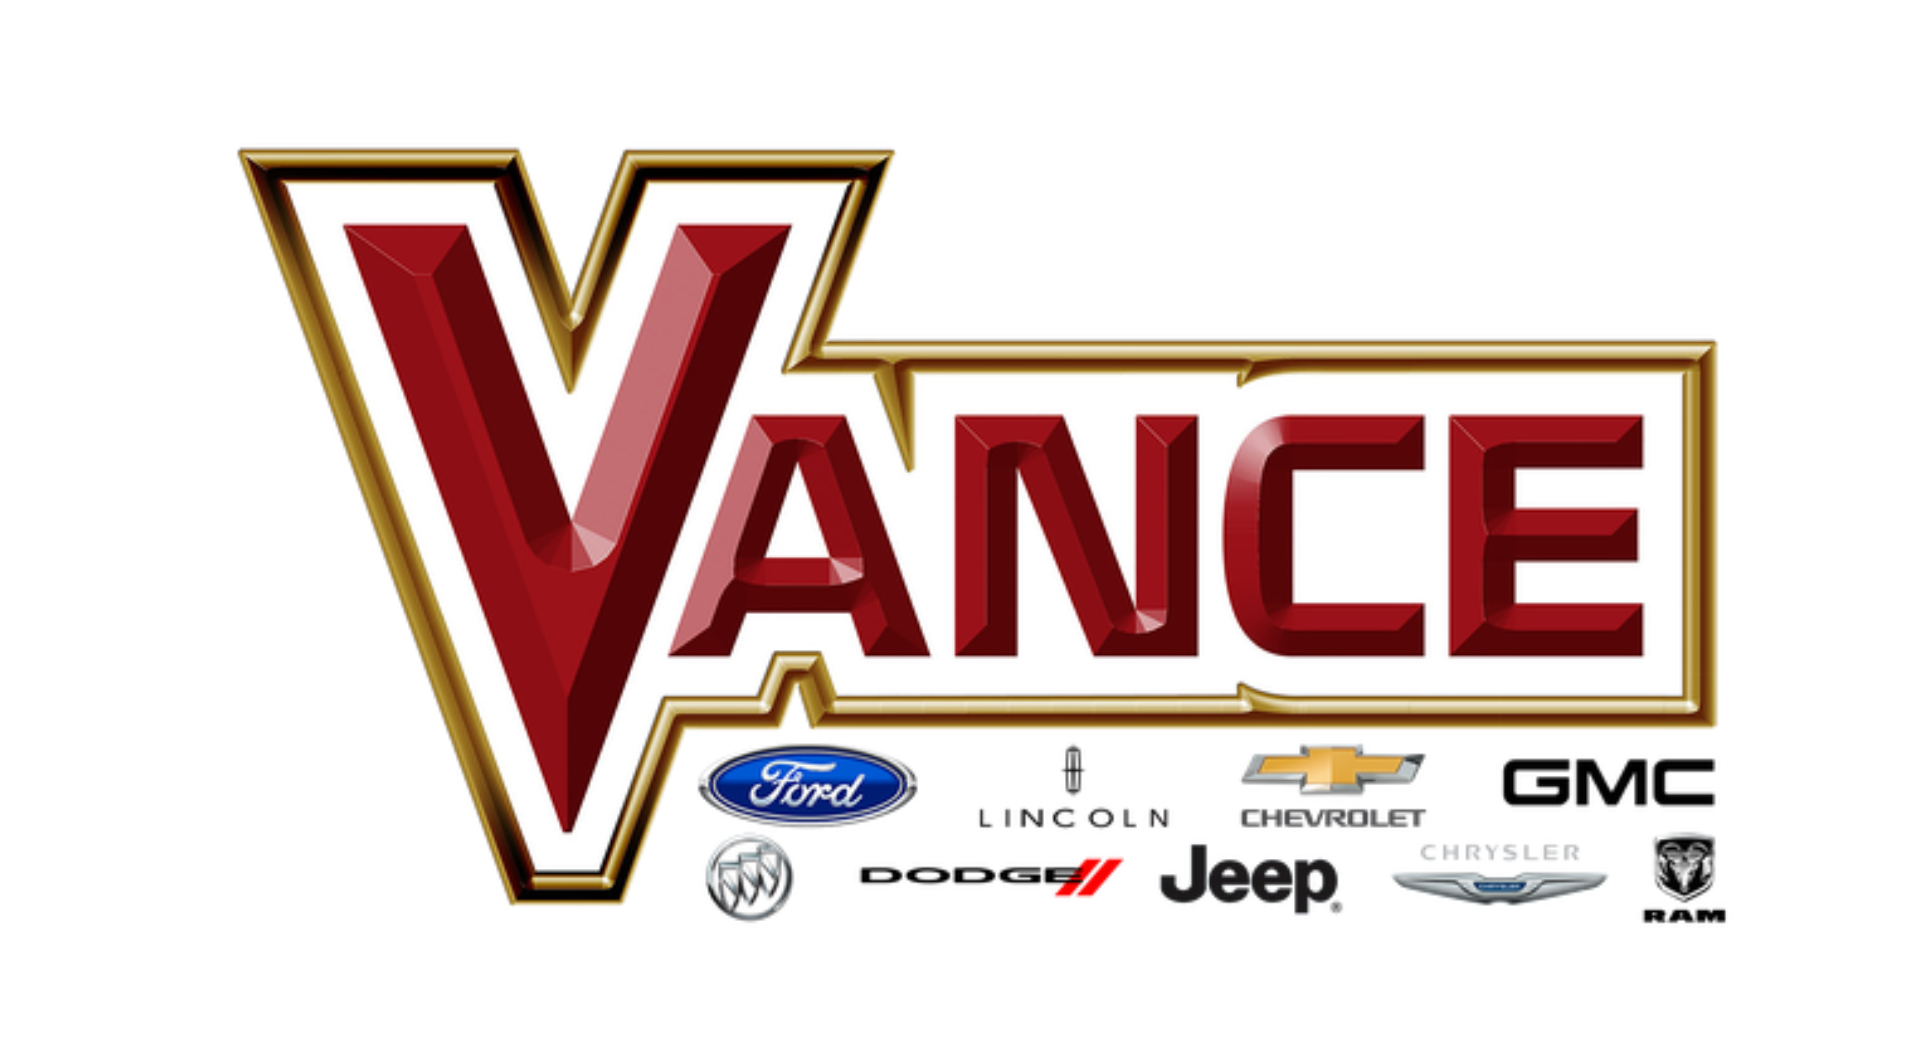 Vance CDJR and Vance Chevy Buick GMC are Certified Agriculture Dealers.